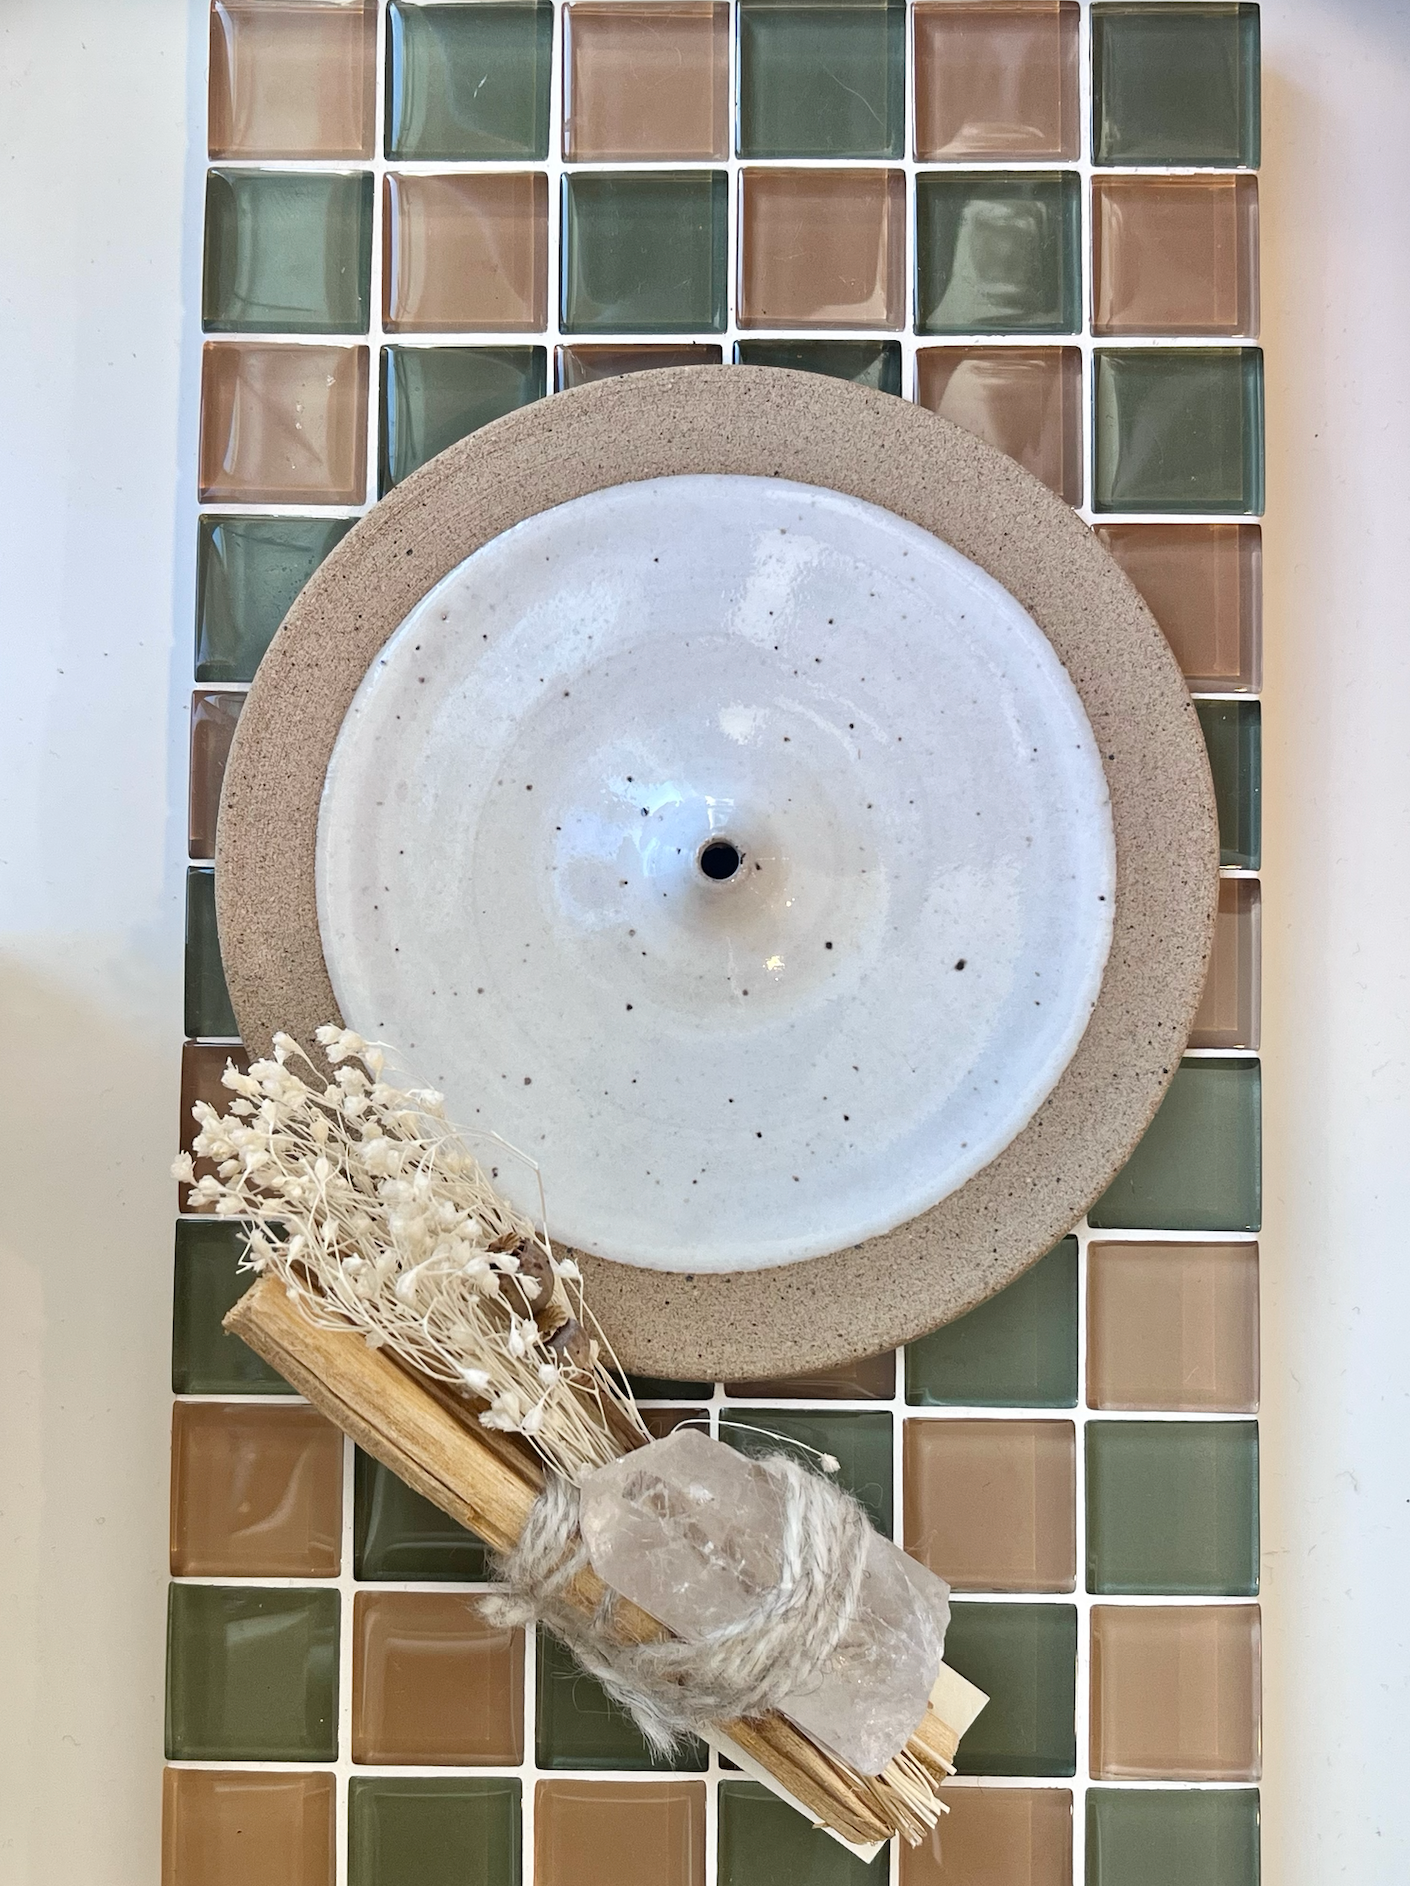 Handmade ceramic incense holder with a white speckled glaze. Each item is made individually in Olympia, Washington and there will be slight variation in each one.